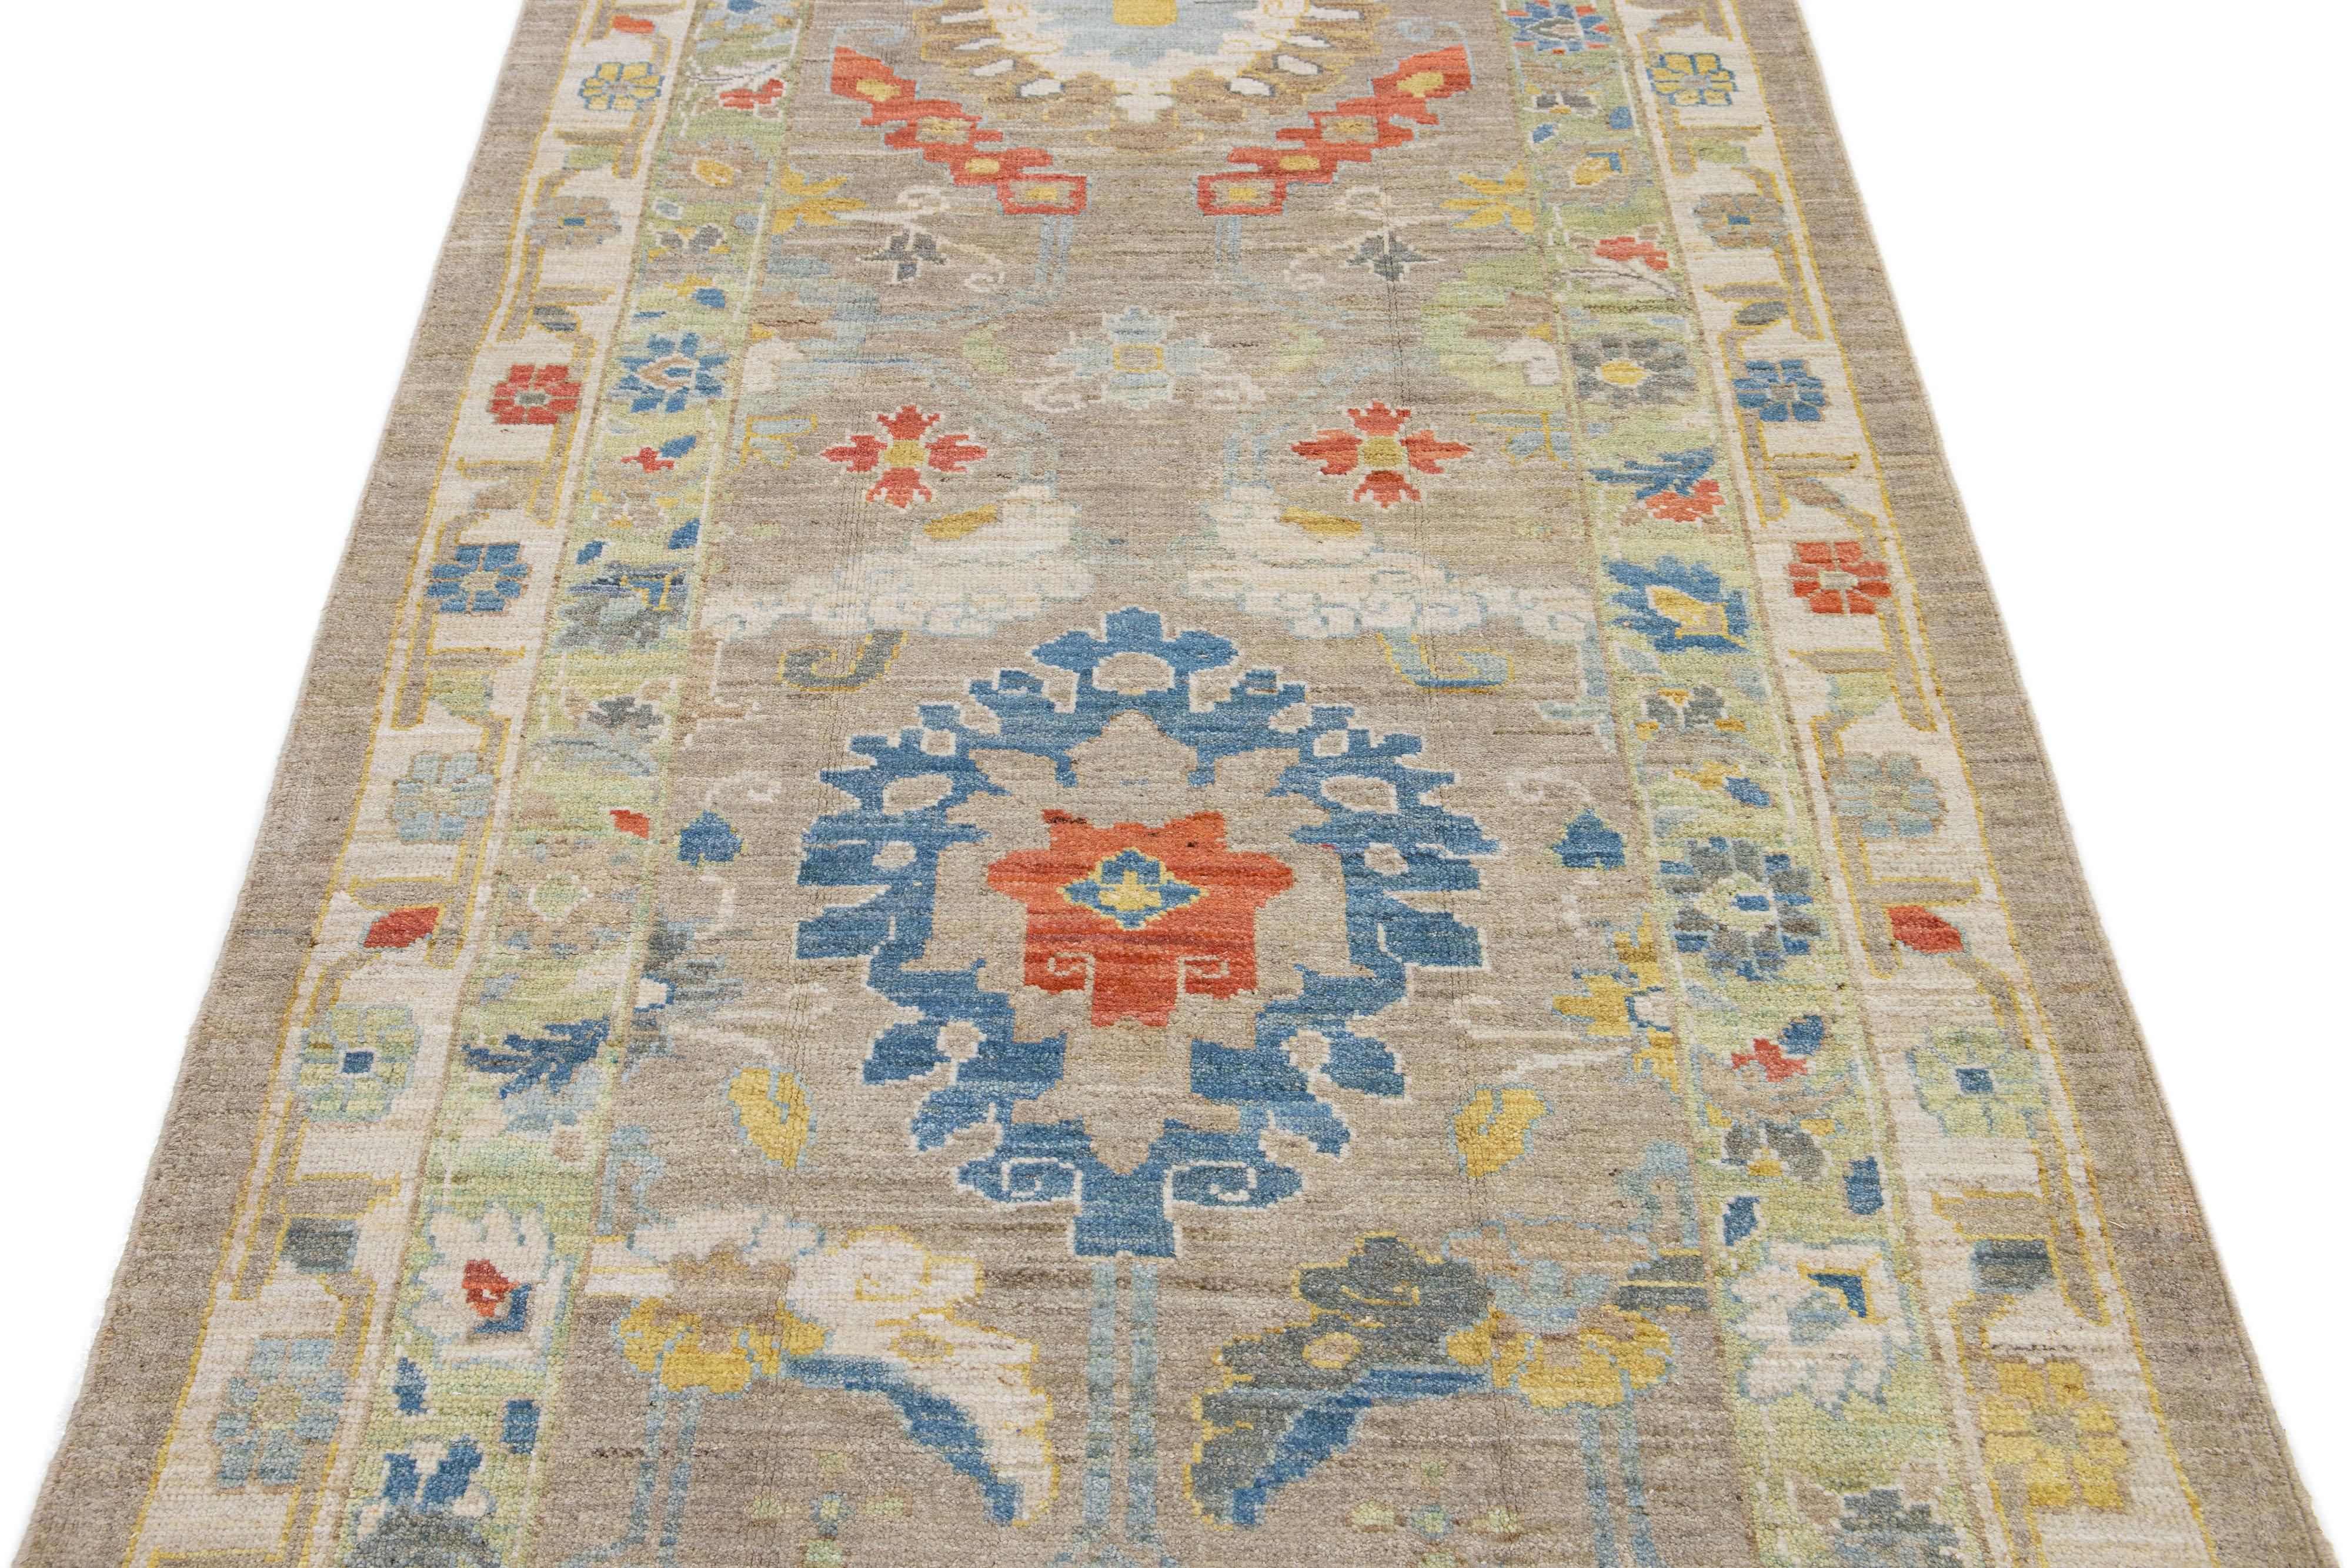 This contemporary take on the traditional Sultanabad style is showcased in an exquisite hand-knotted wool runner with a striking beige color. An intricately designed frame accentuates its all-over floral motif, adorned with multicolored accents that